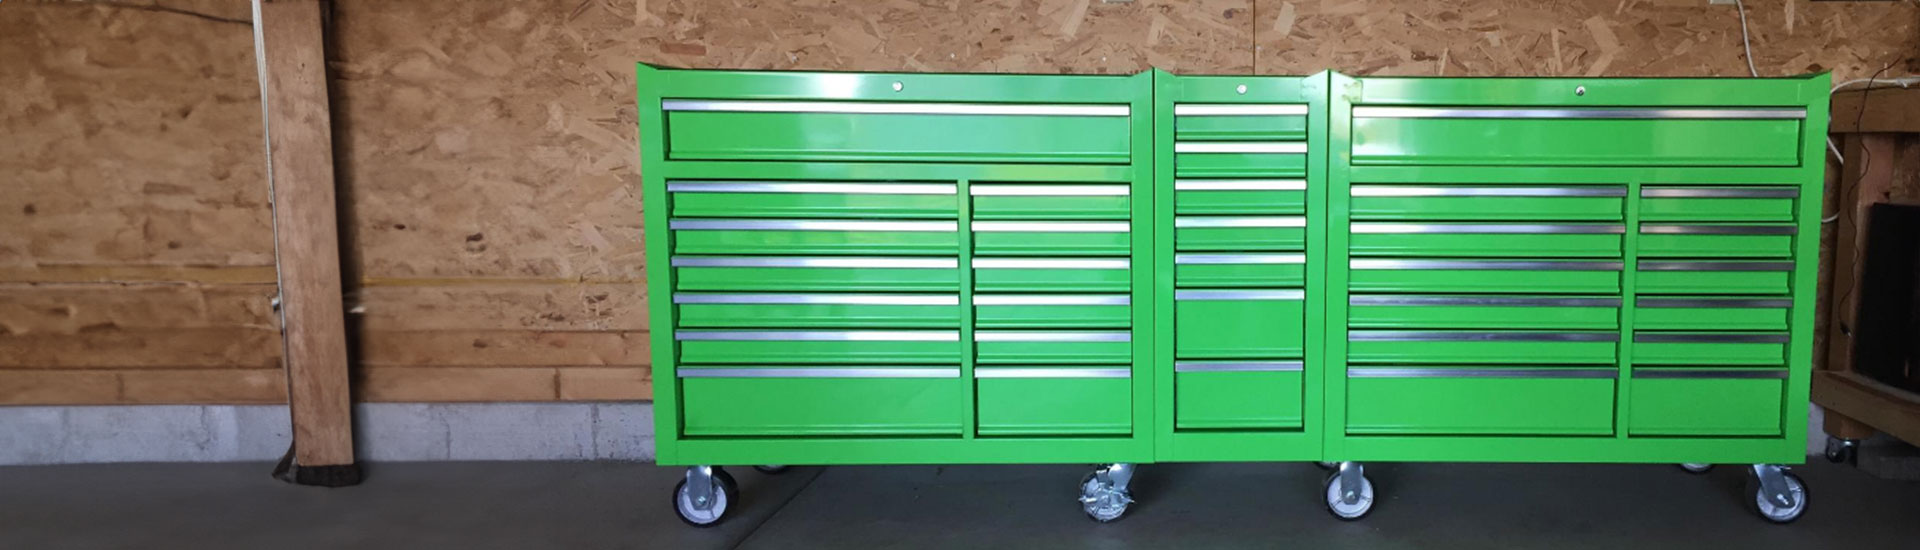 Green Tool Cabinet Wraps